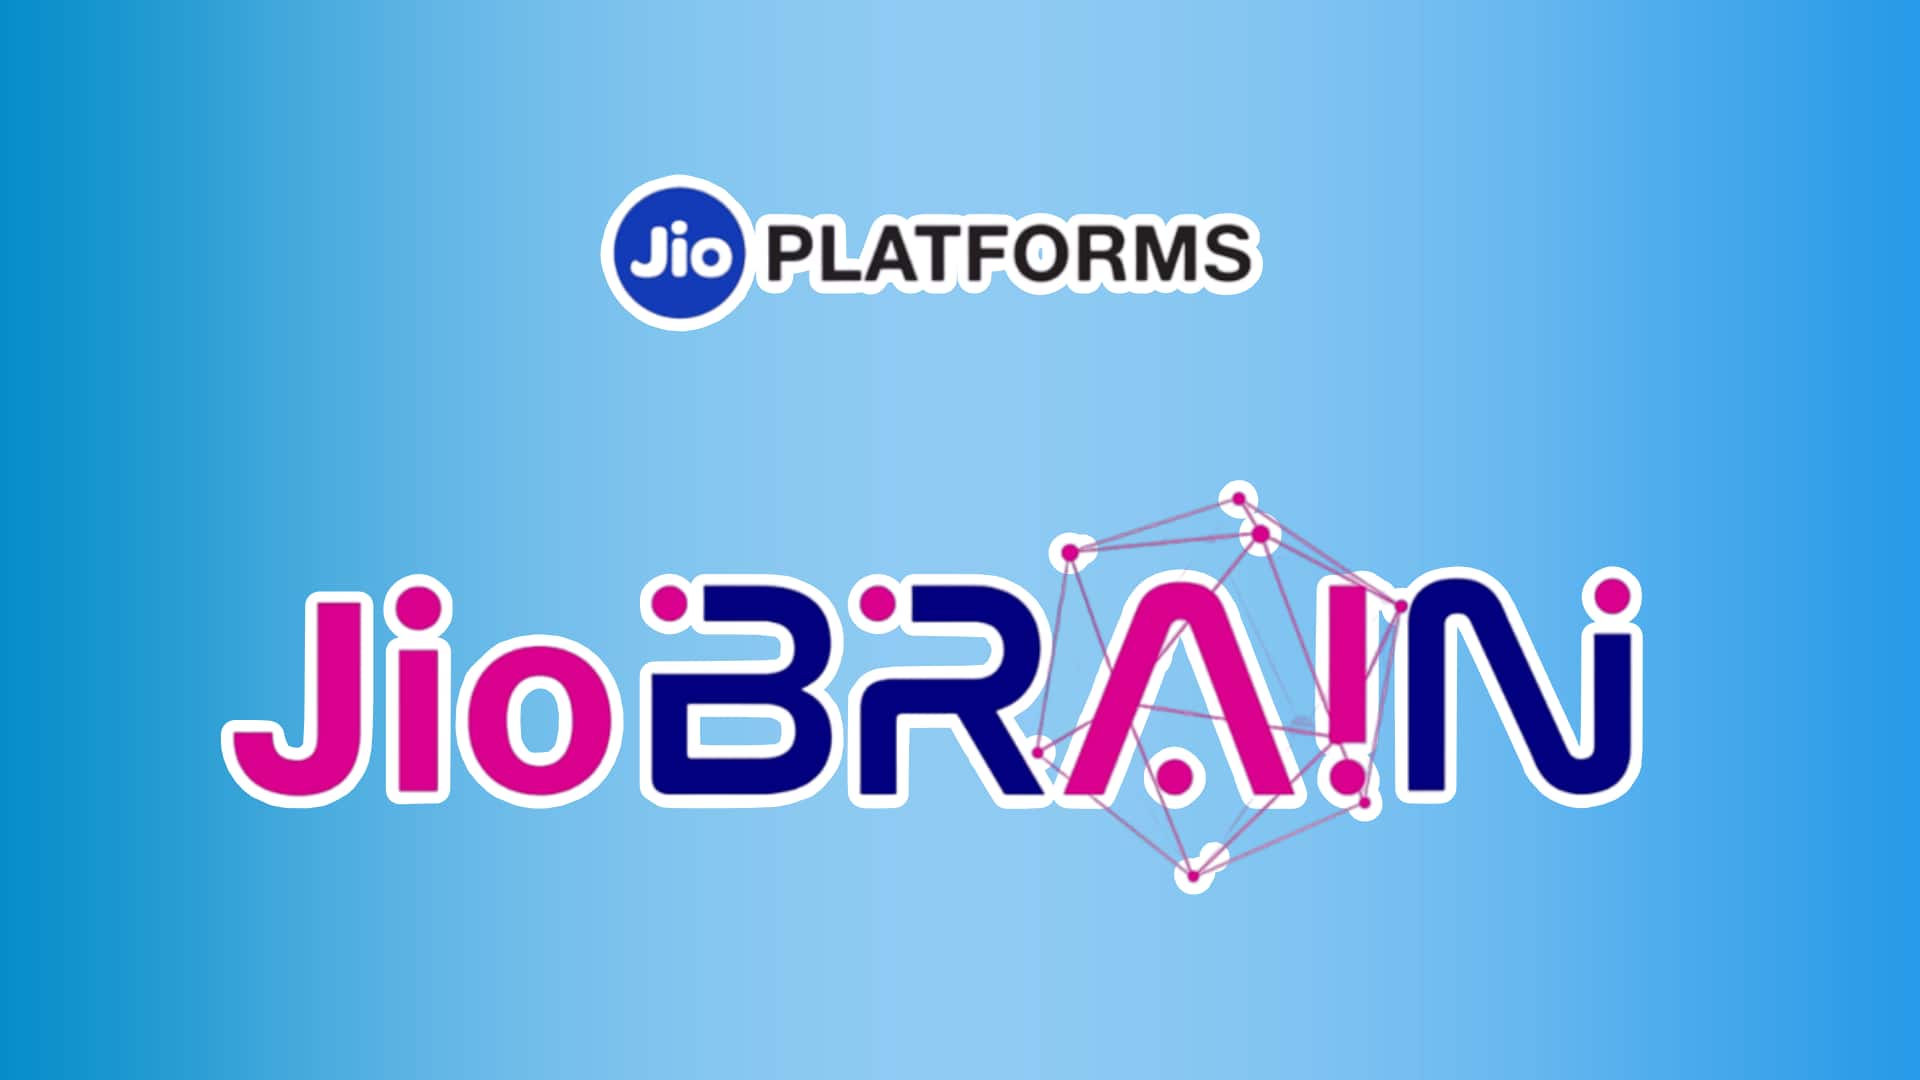 Reliance's 'JioBrain' will help businesses create new AI-powered services